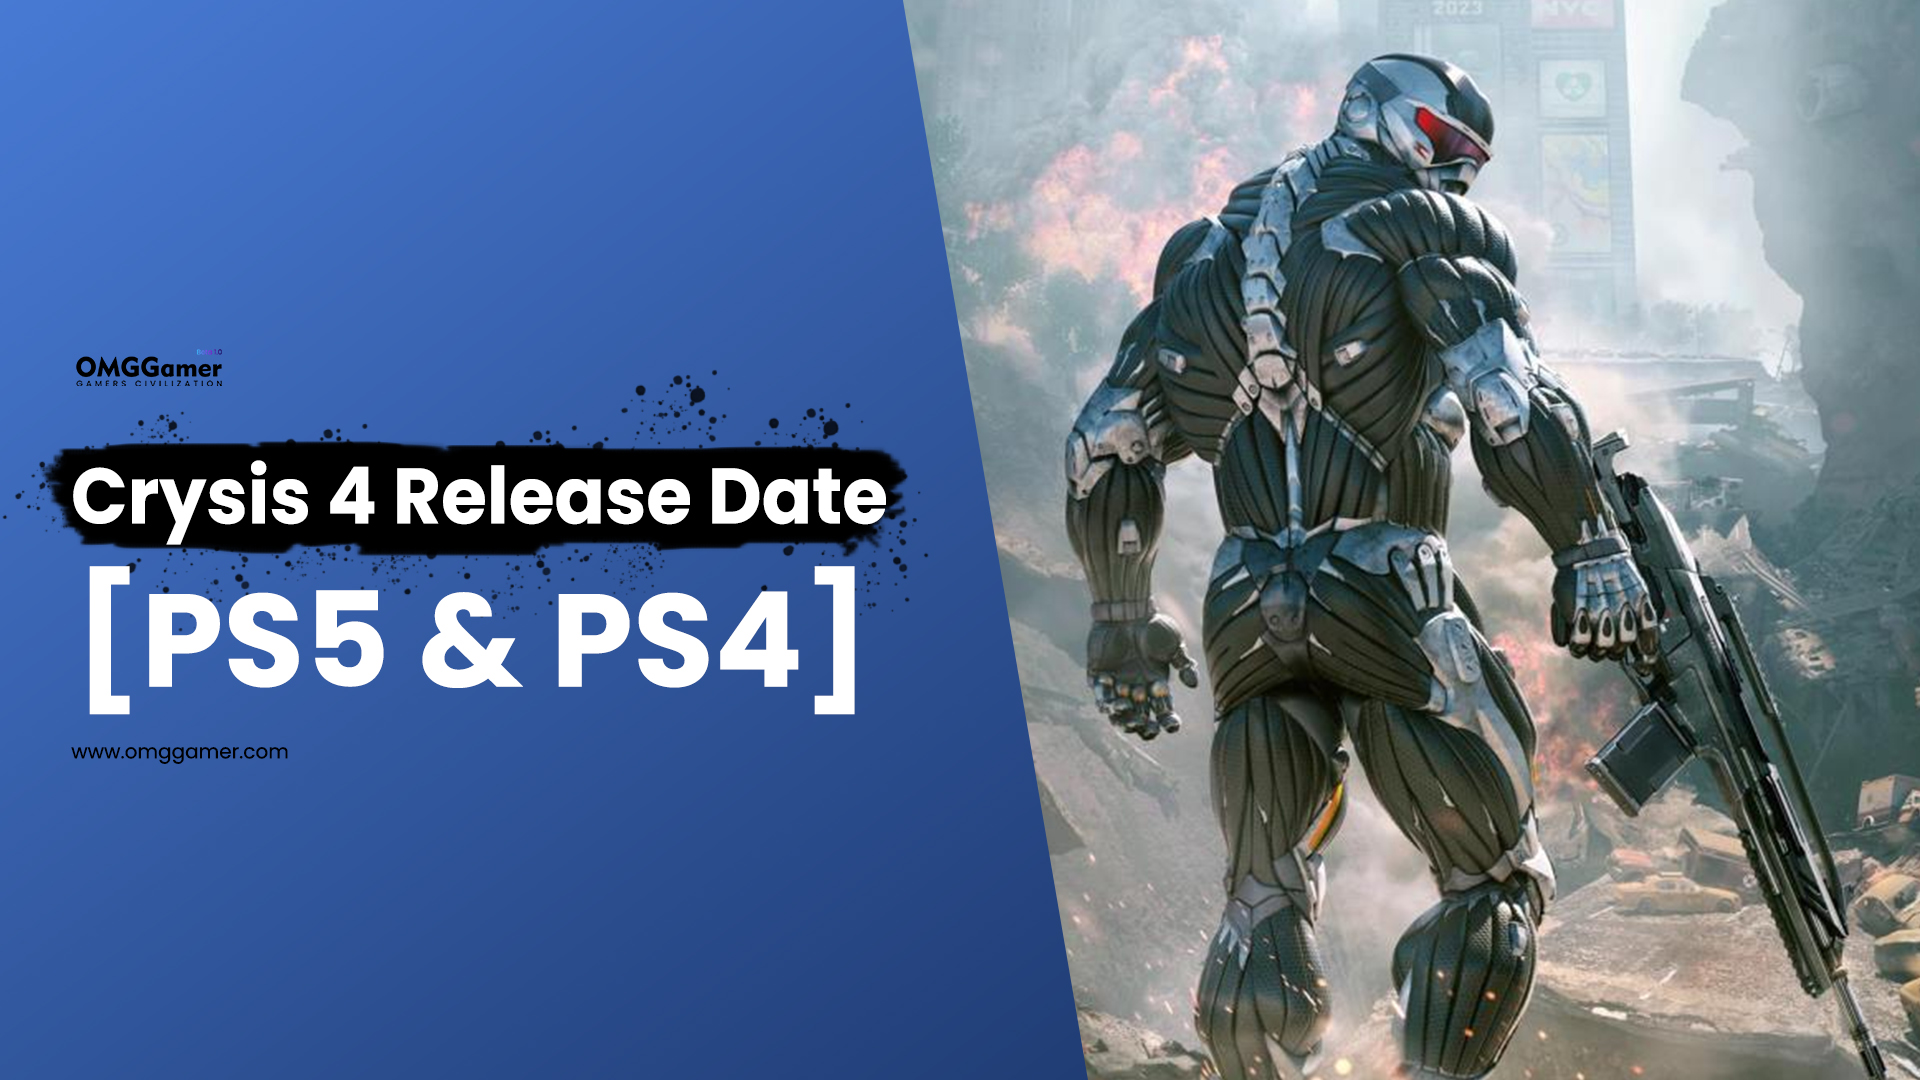 Crysis 4 Release Date [PS5 & PS4]